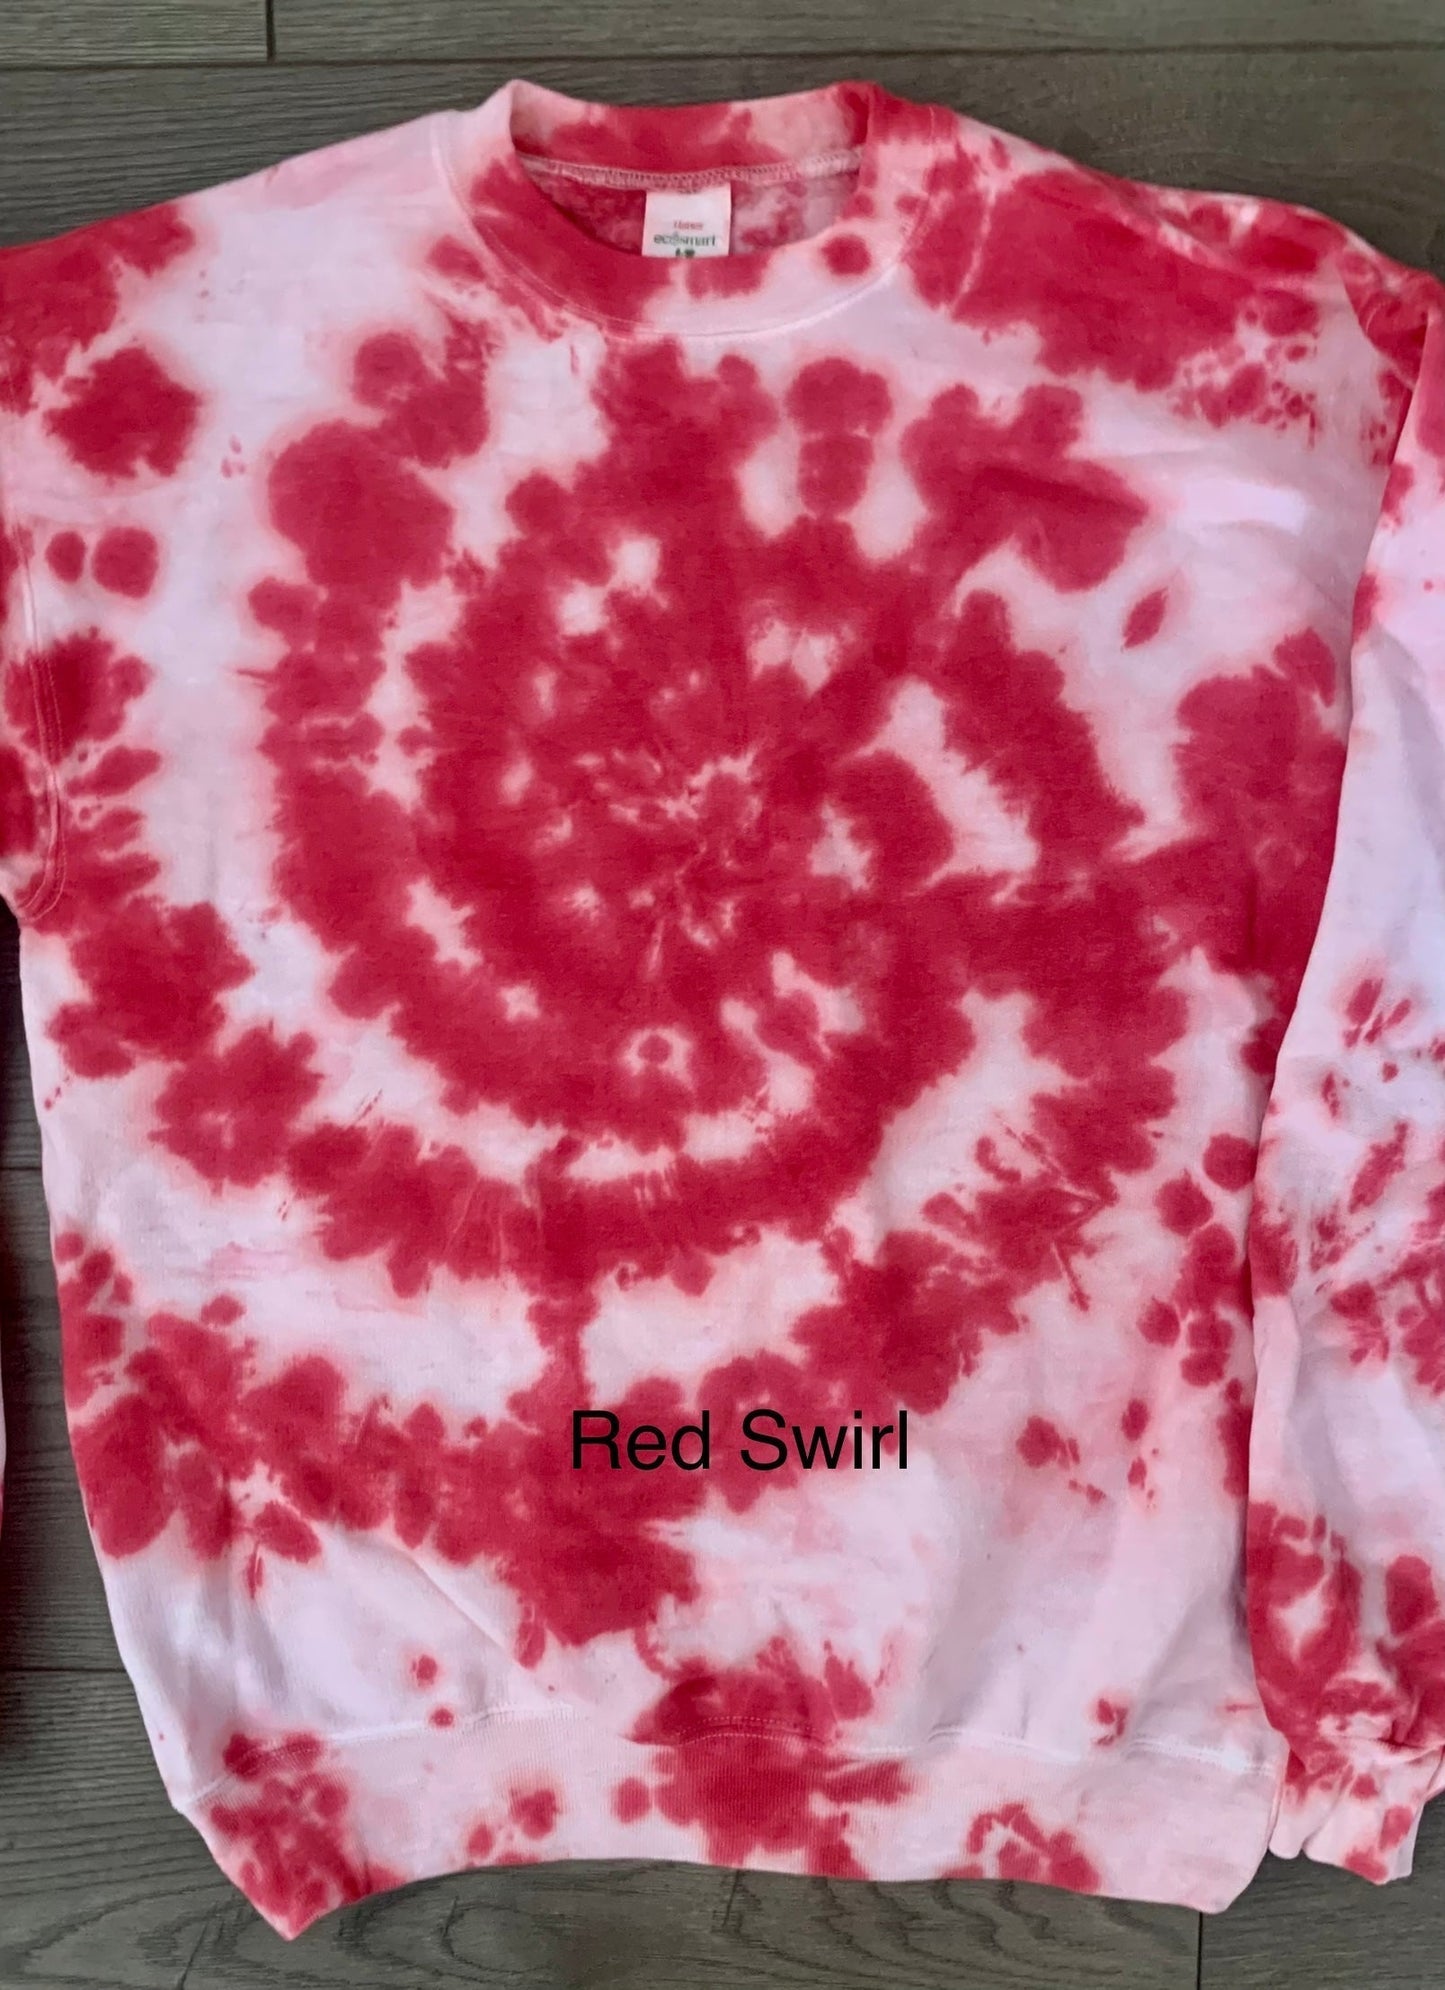 Hand-dyed Adult It is Well With My Soul Long-Sleeve T-shirt - CHOOSE TIE DYE COLORS